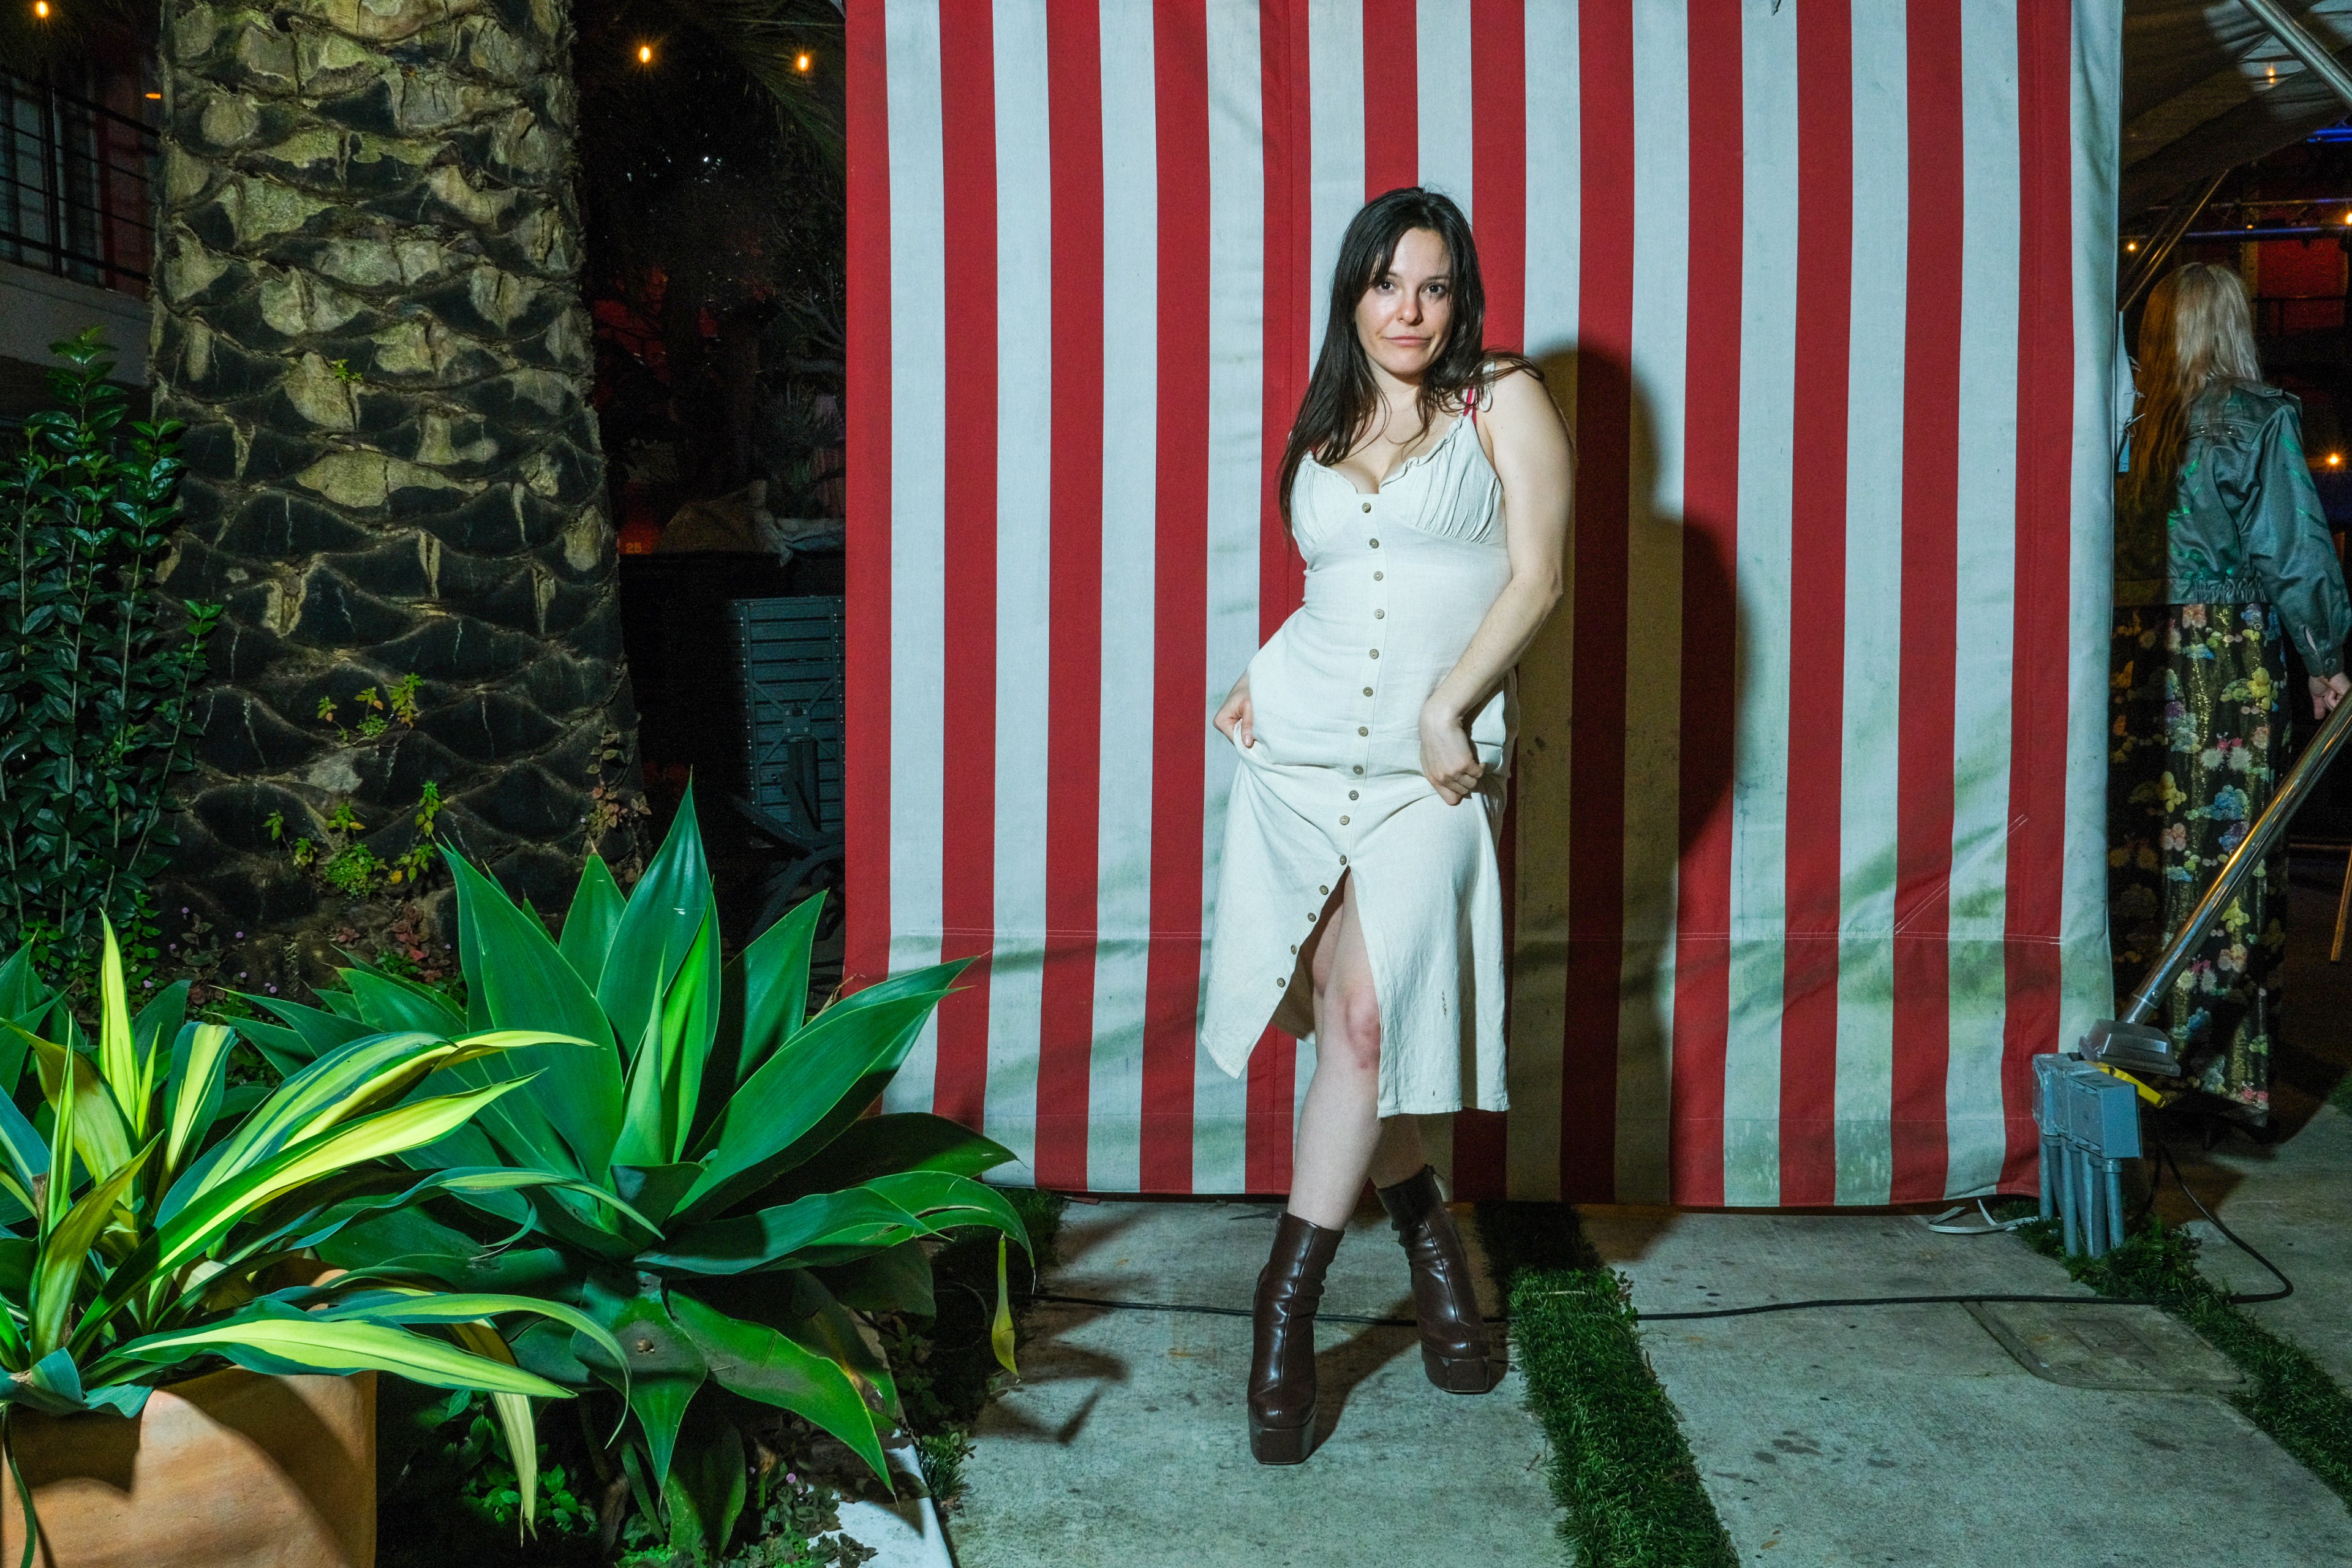 A woman poses in front of red and white stripes, wearing a white dress and brown boots, with plants nearby.